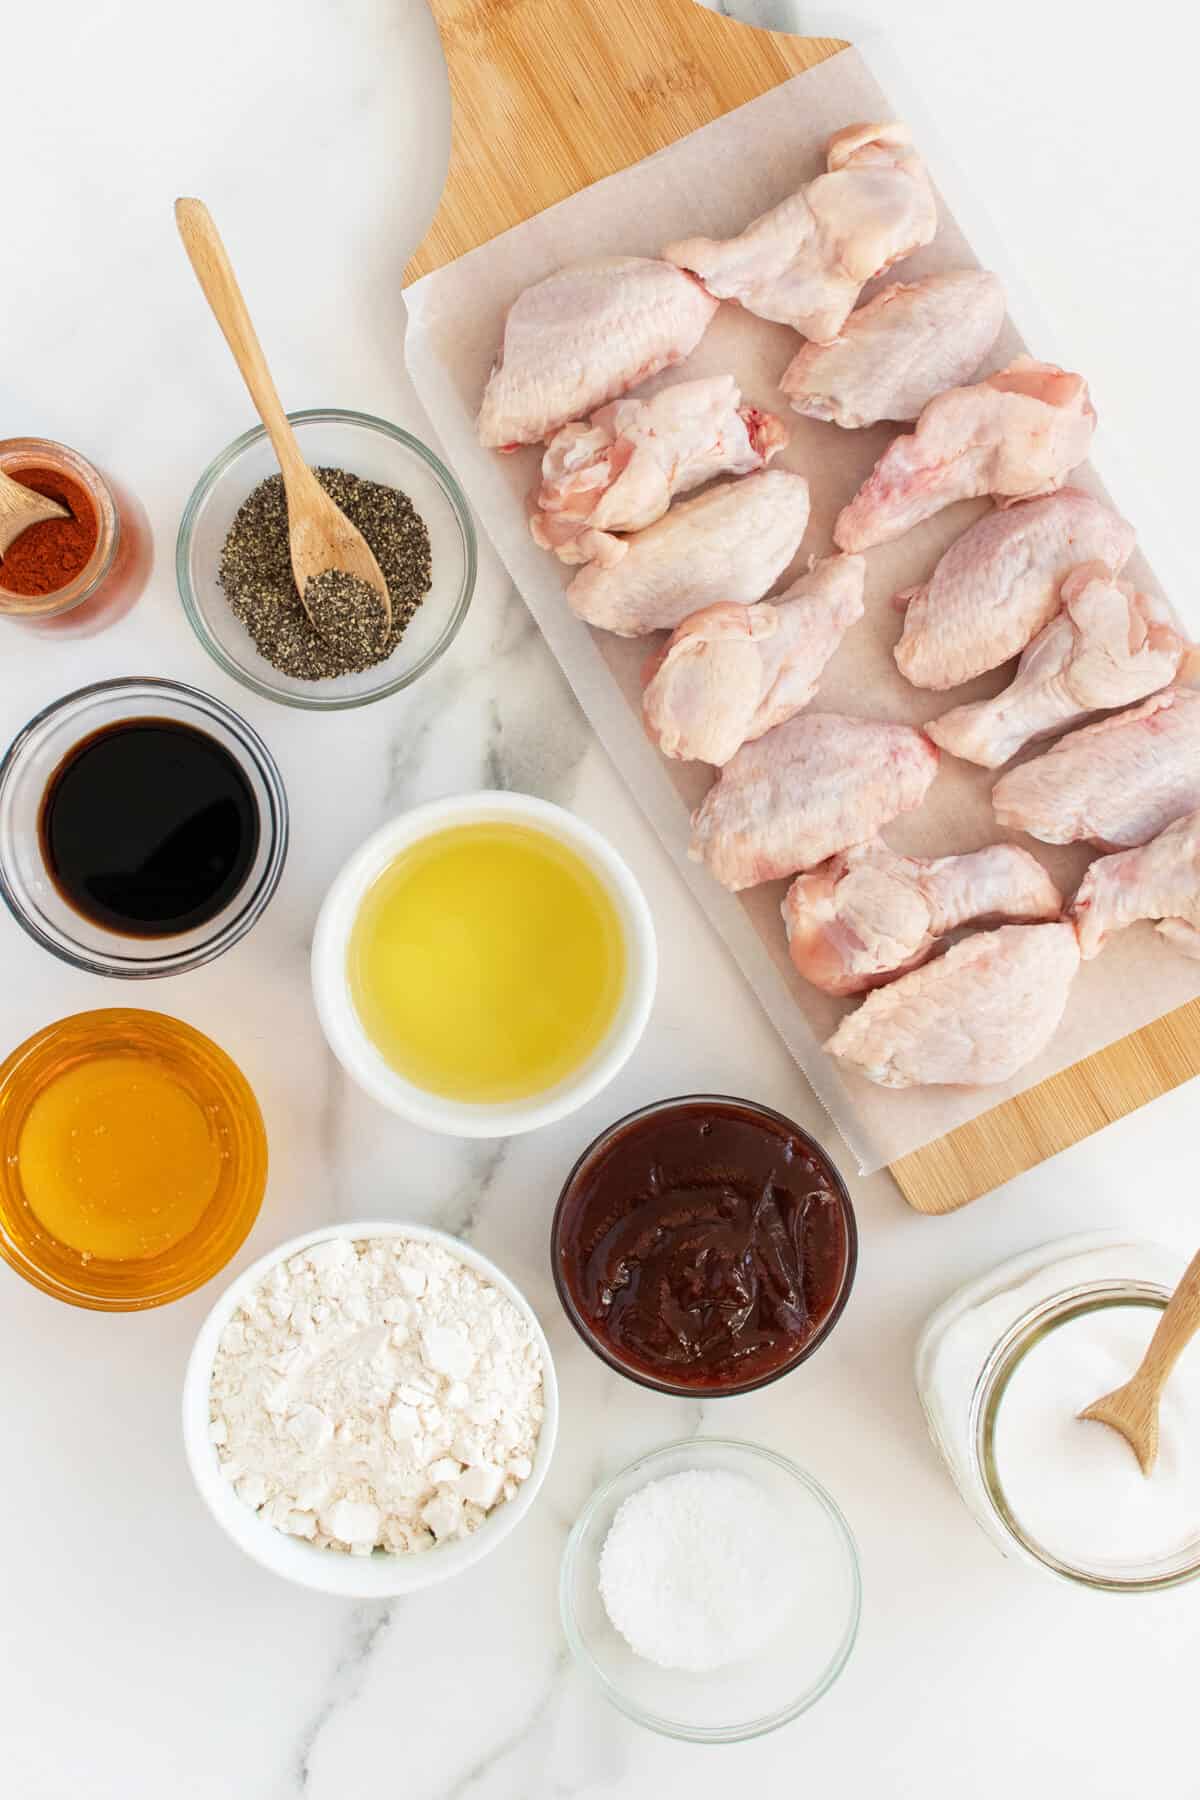 Honey BBQ wings ingredients in small white bowls